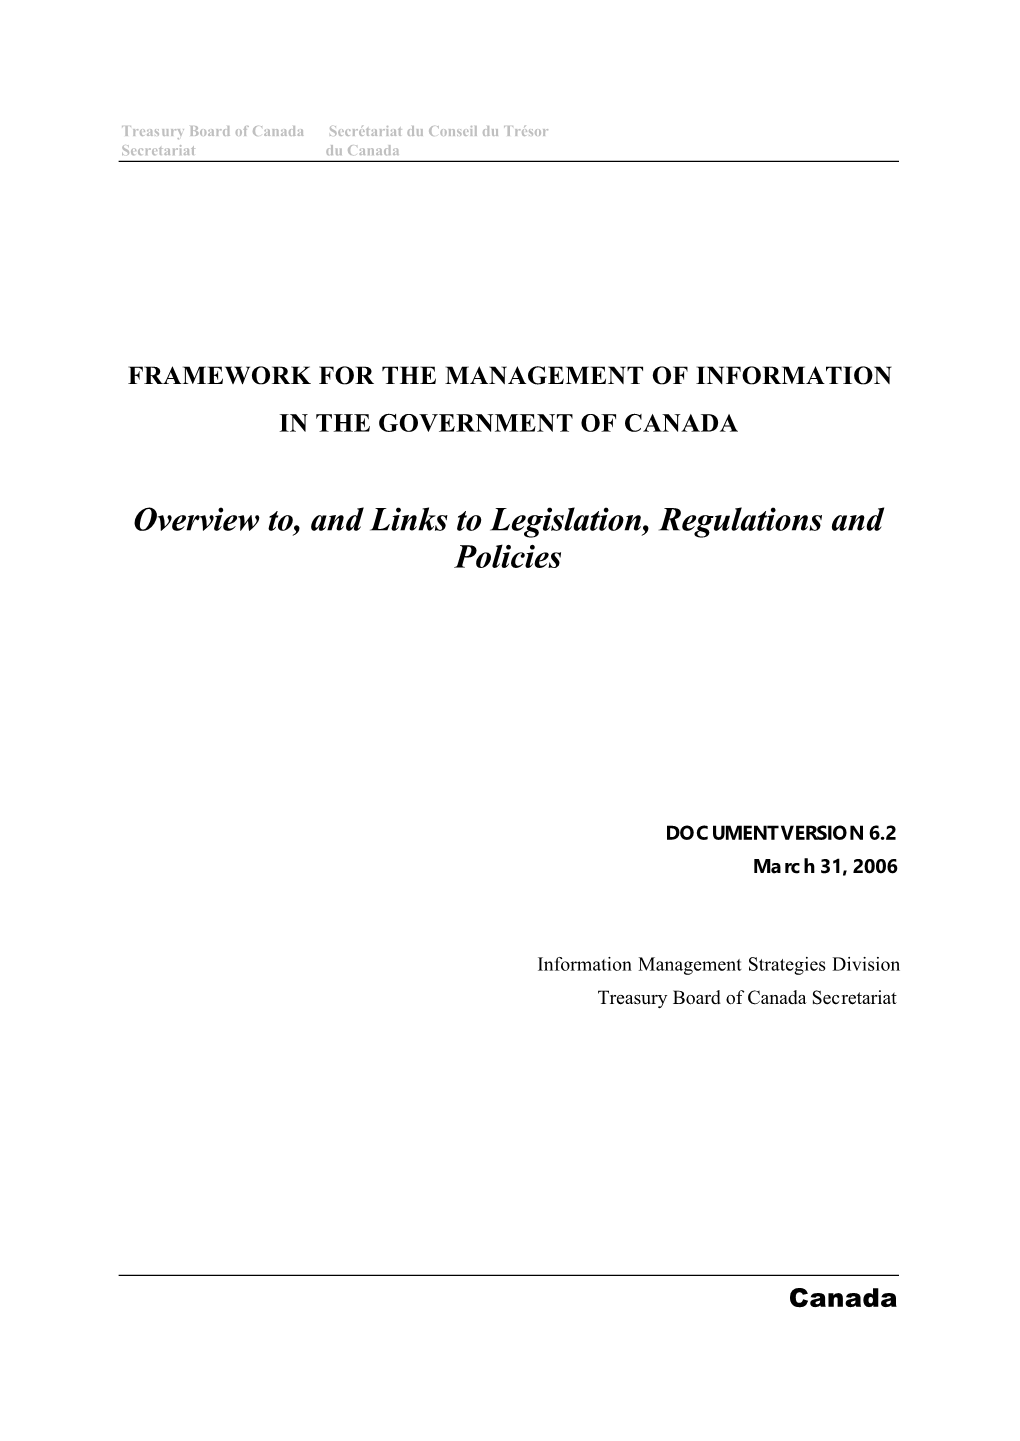 Overview To, and Links to Legislation, Regulations and Policies